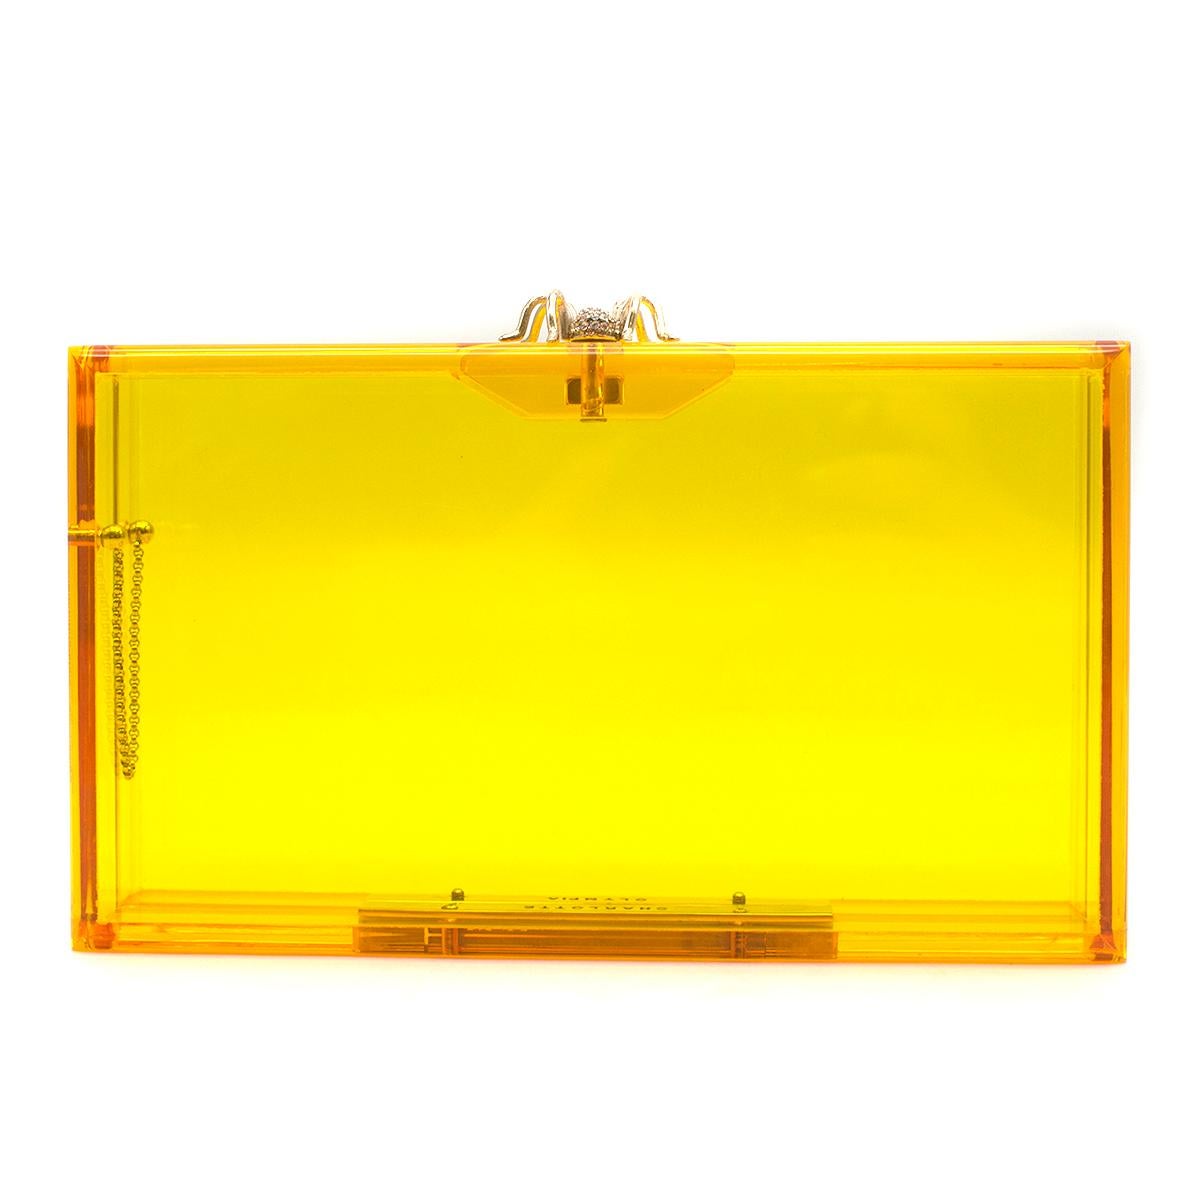 Charlotte Olympia Perspex Pandora Clutch

- Golden yellow perspex Pandora clutch
- Gold-tone and Swarovski crystal spider clasp
- Golden metallic sparkly zipped pouch for essentials 
- Boxed with dust bag
- Perfect gift

Please note, these items are